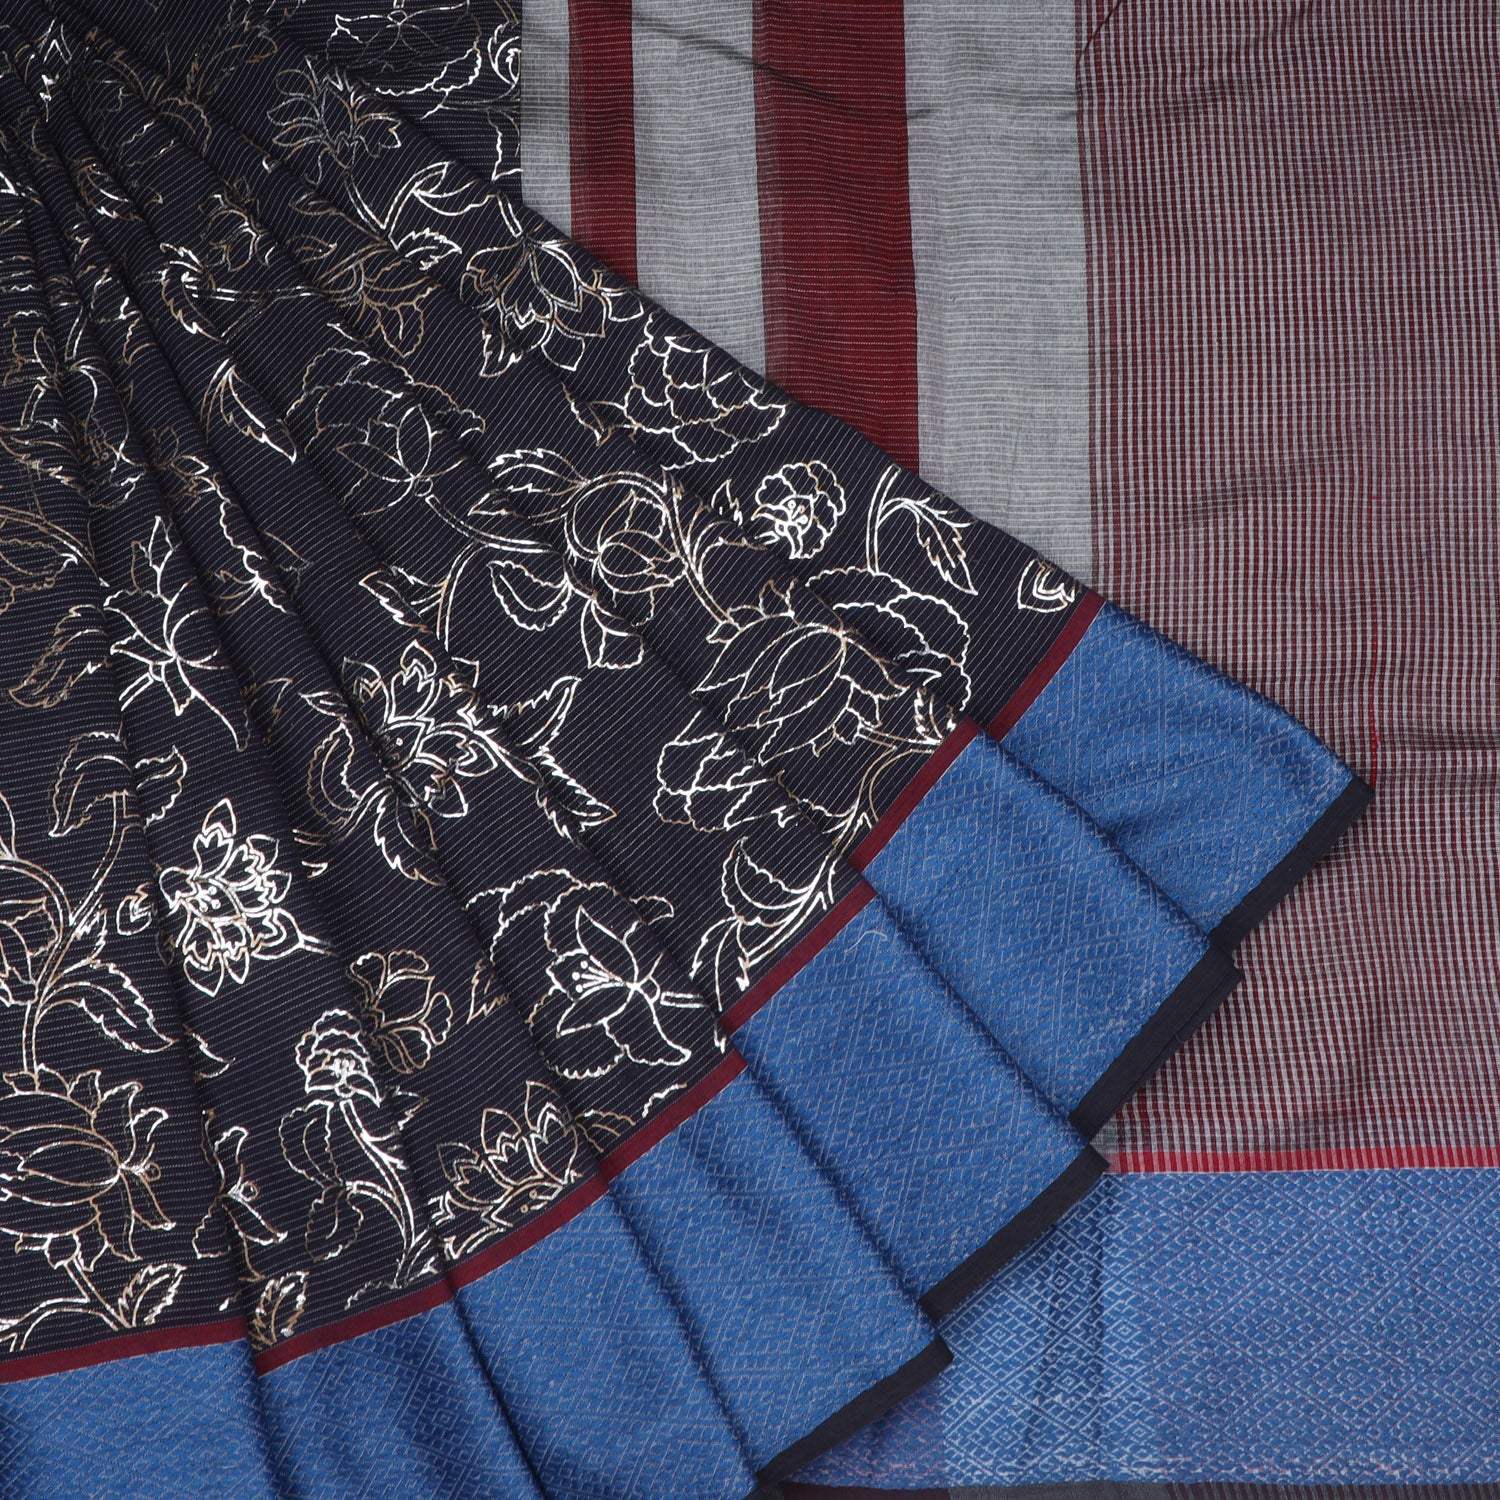 Black Cotton Saree With Foil Printed Motif Pattern - Singhania's